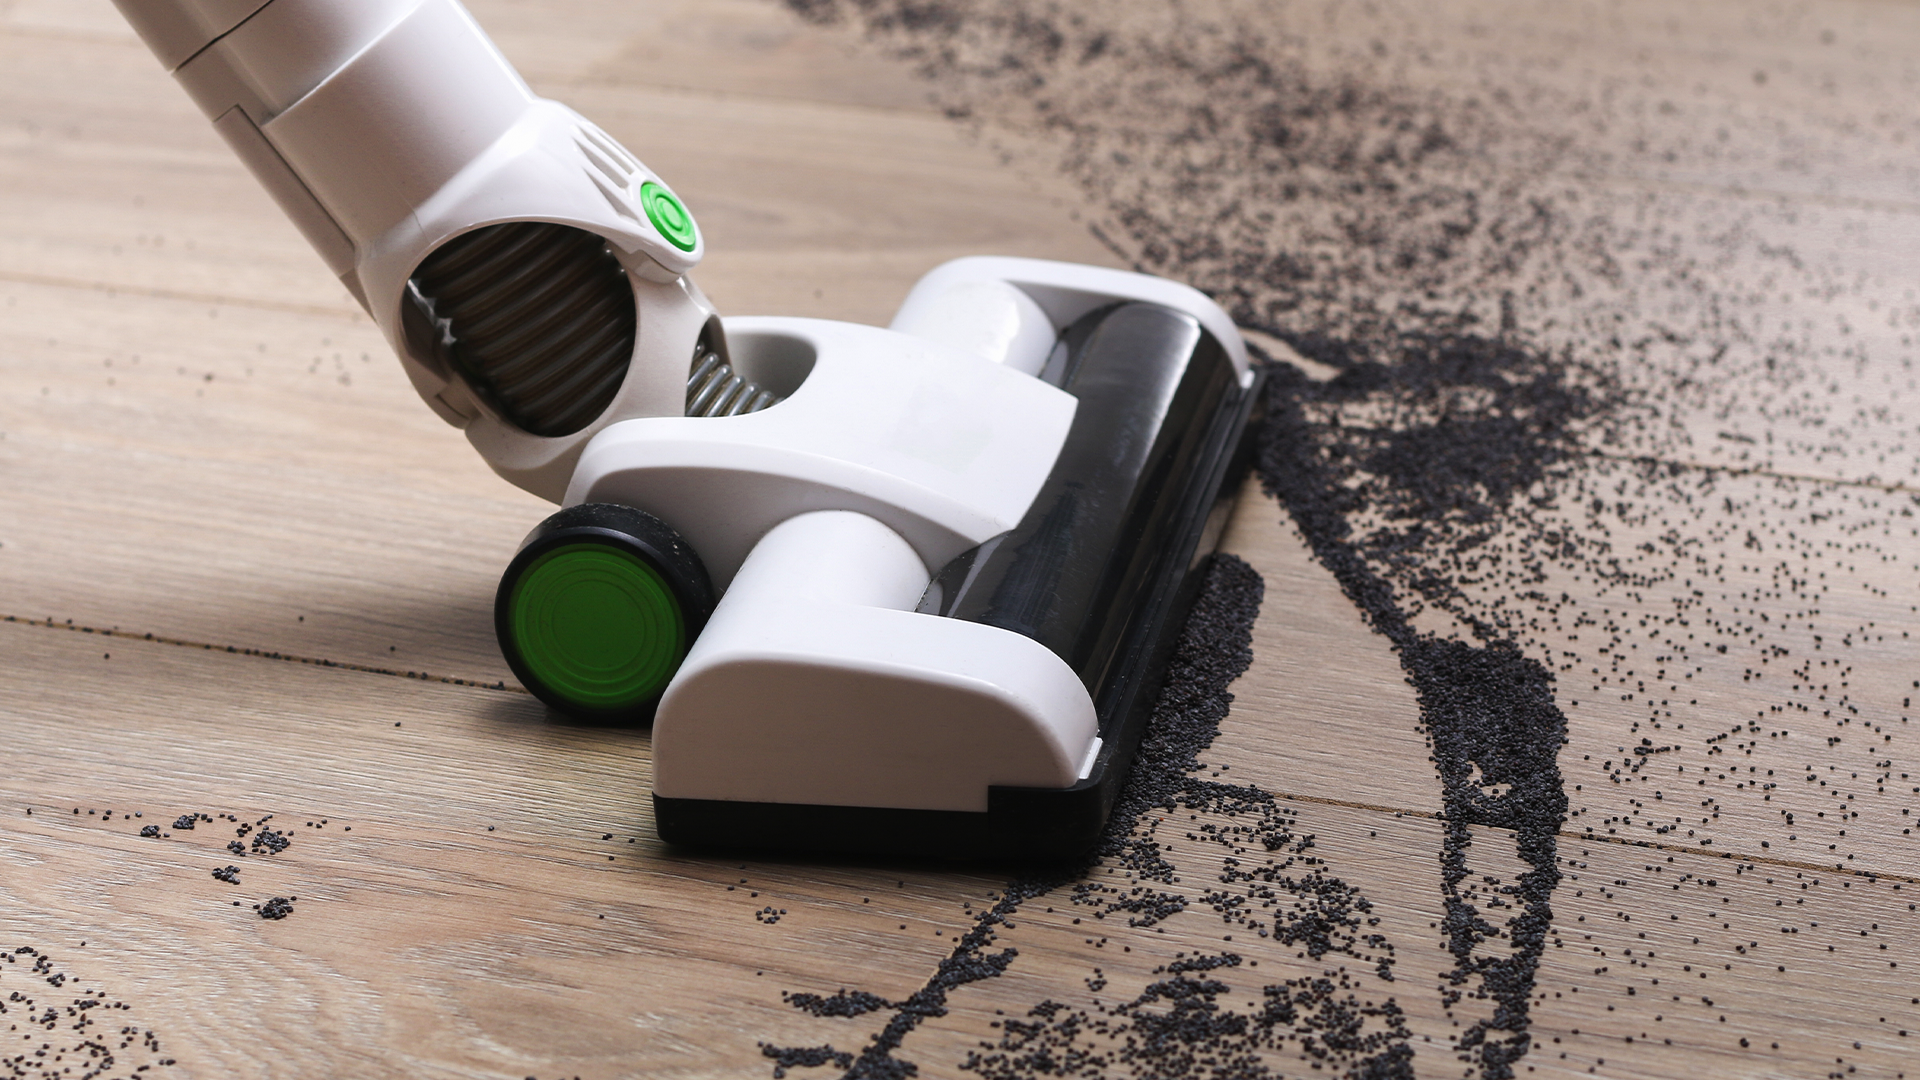 A cordless vacuum cleaning dirt off of hard floor.